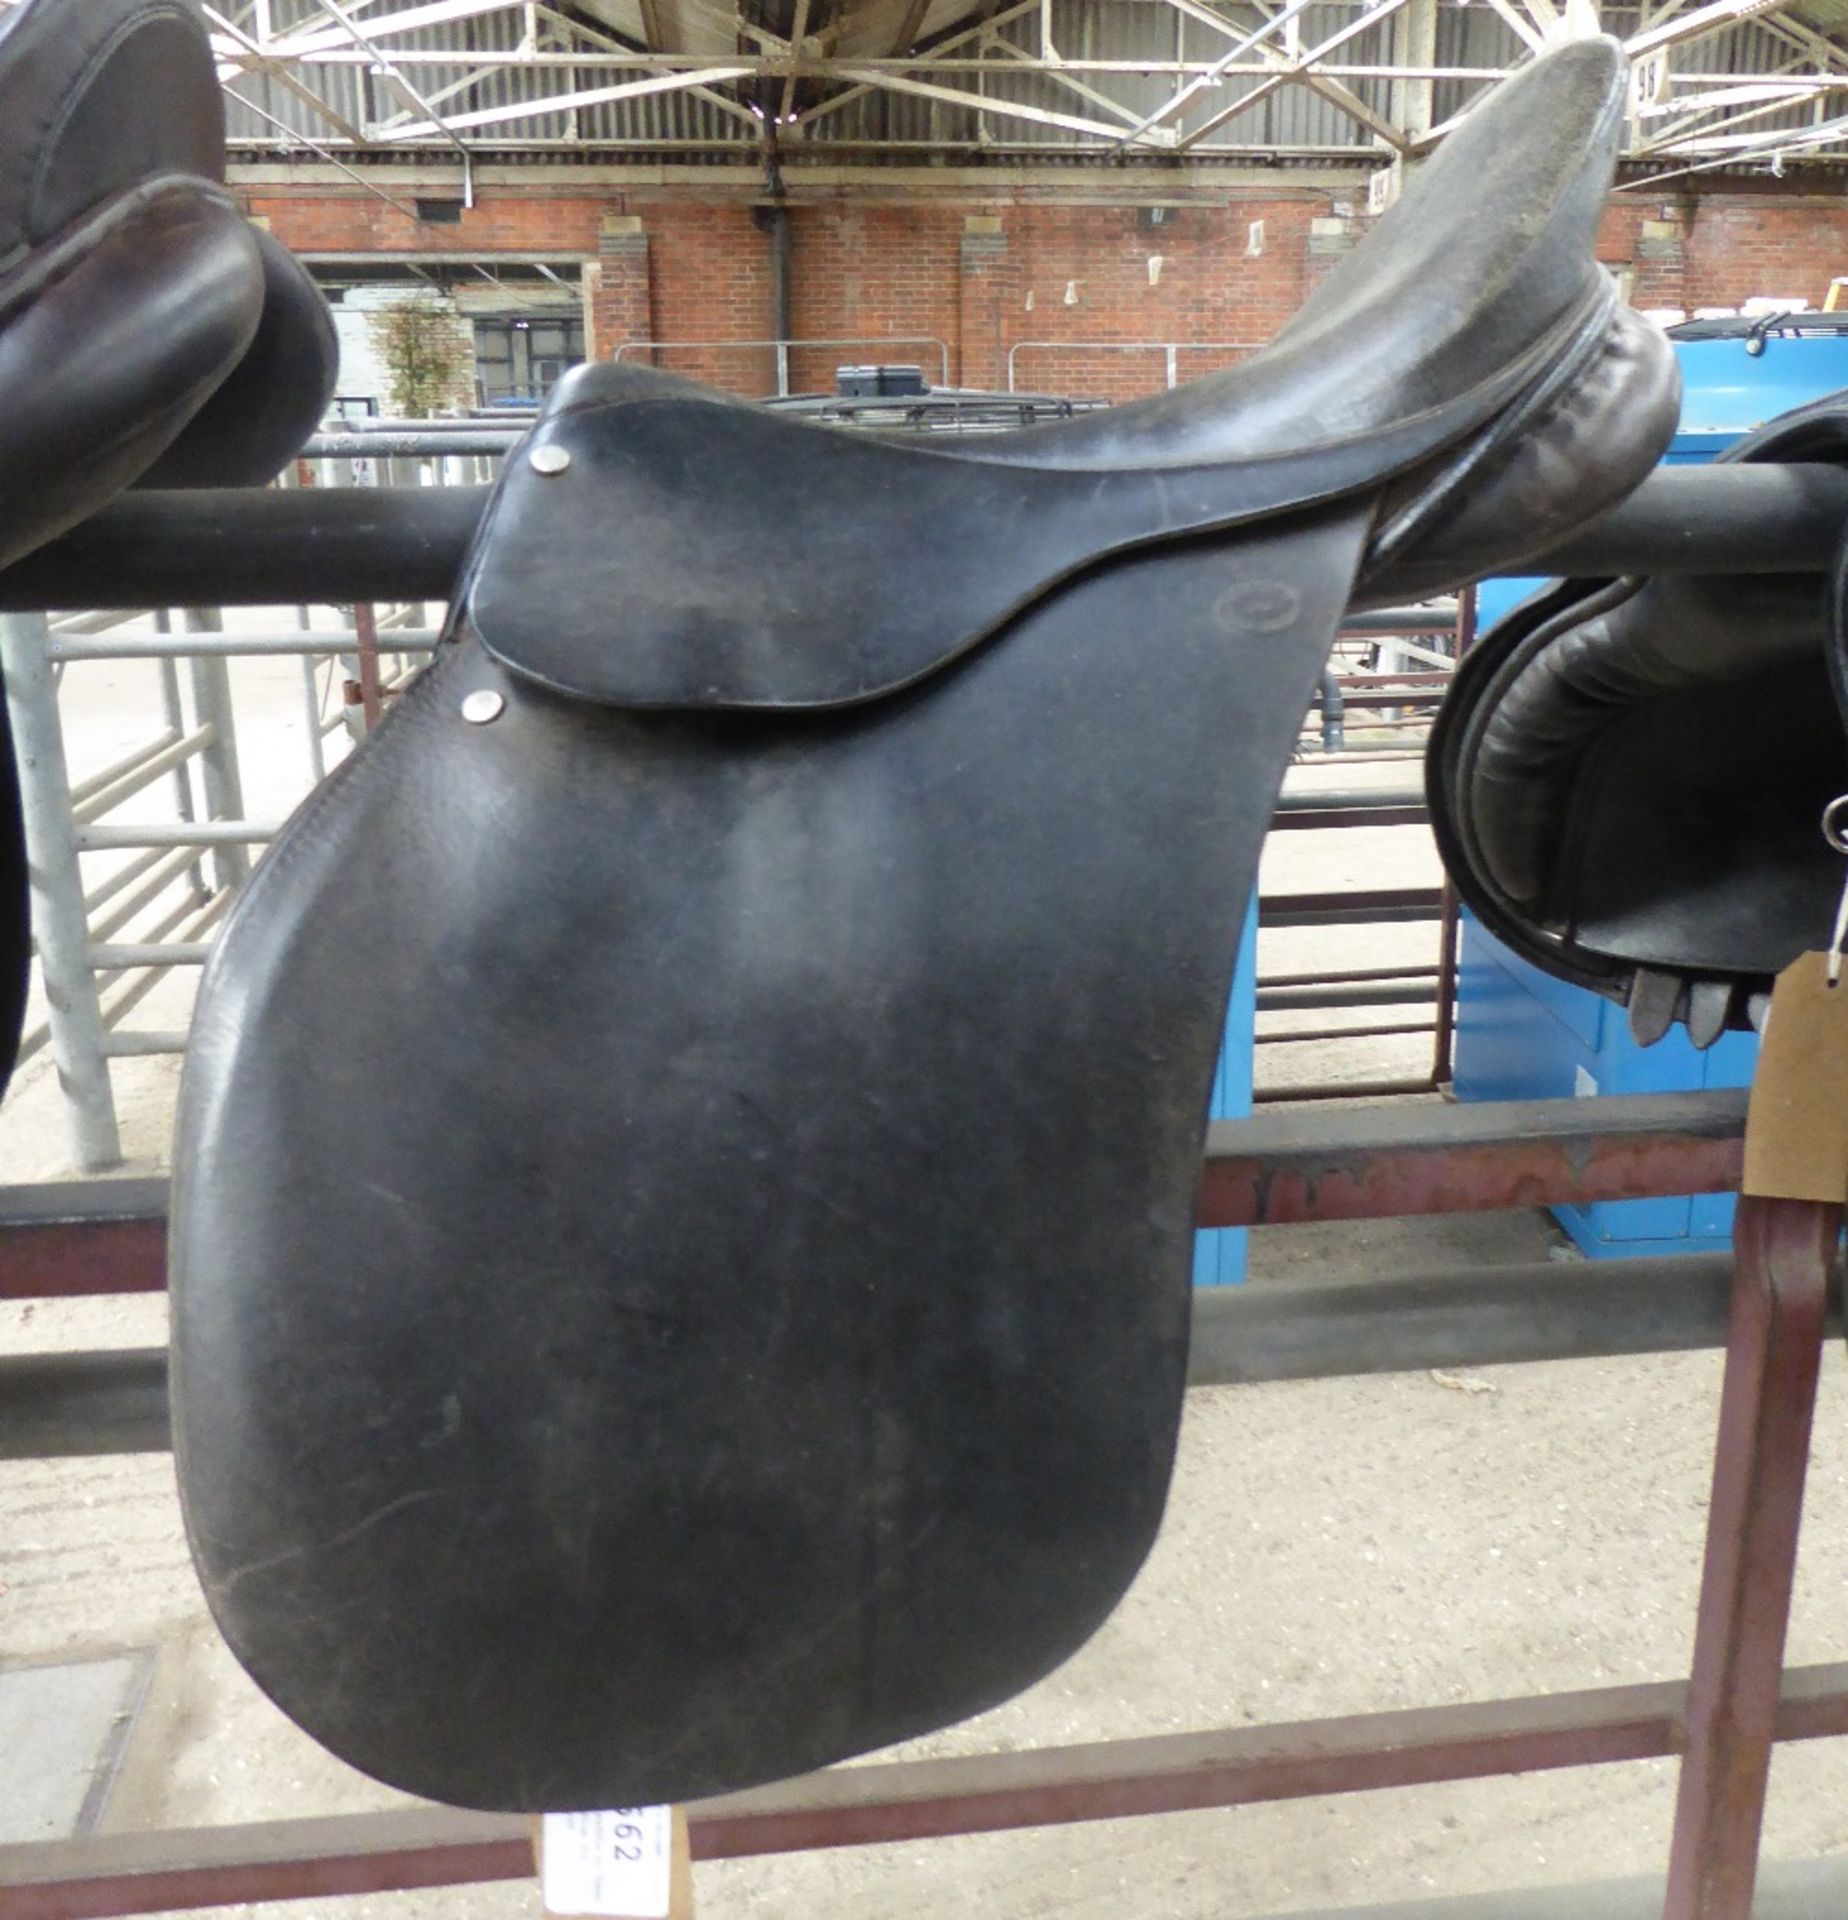 16.5ins saddle by Tower Farm, medium fit - carries VAT